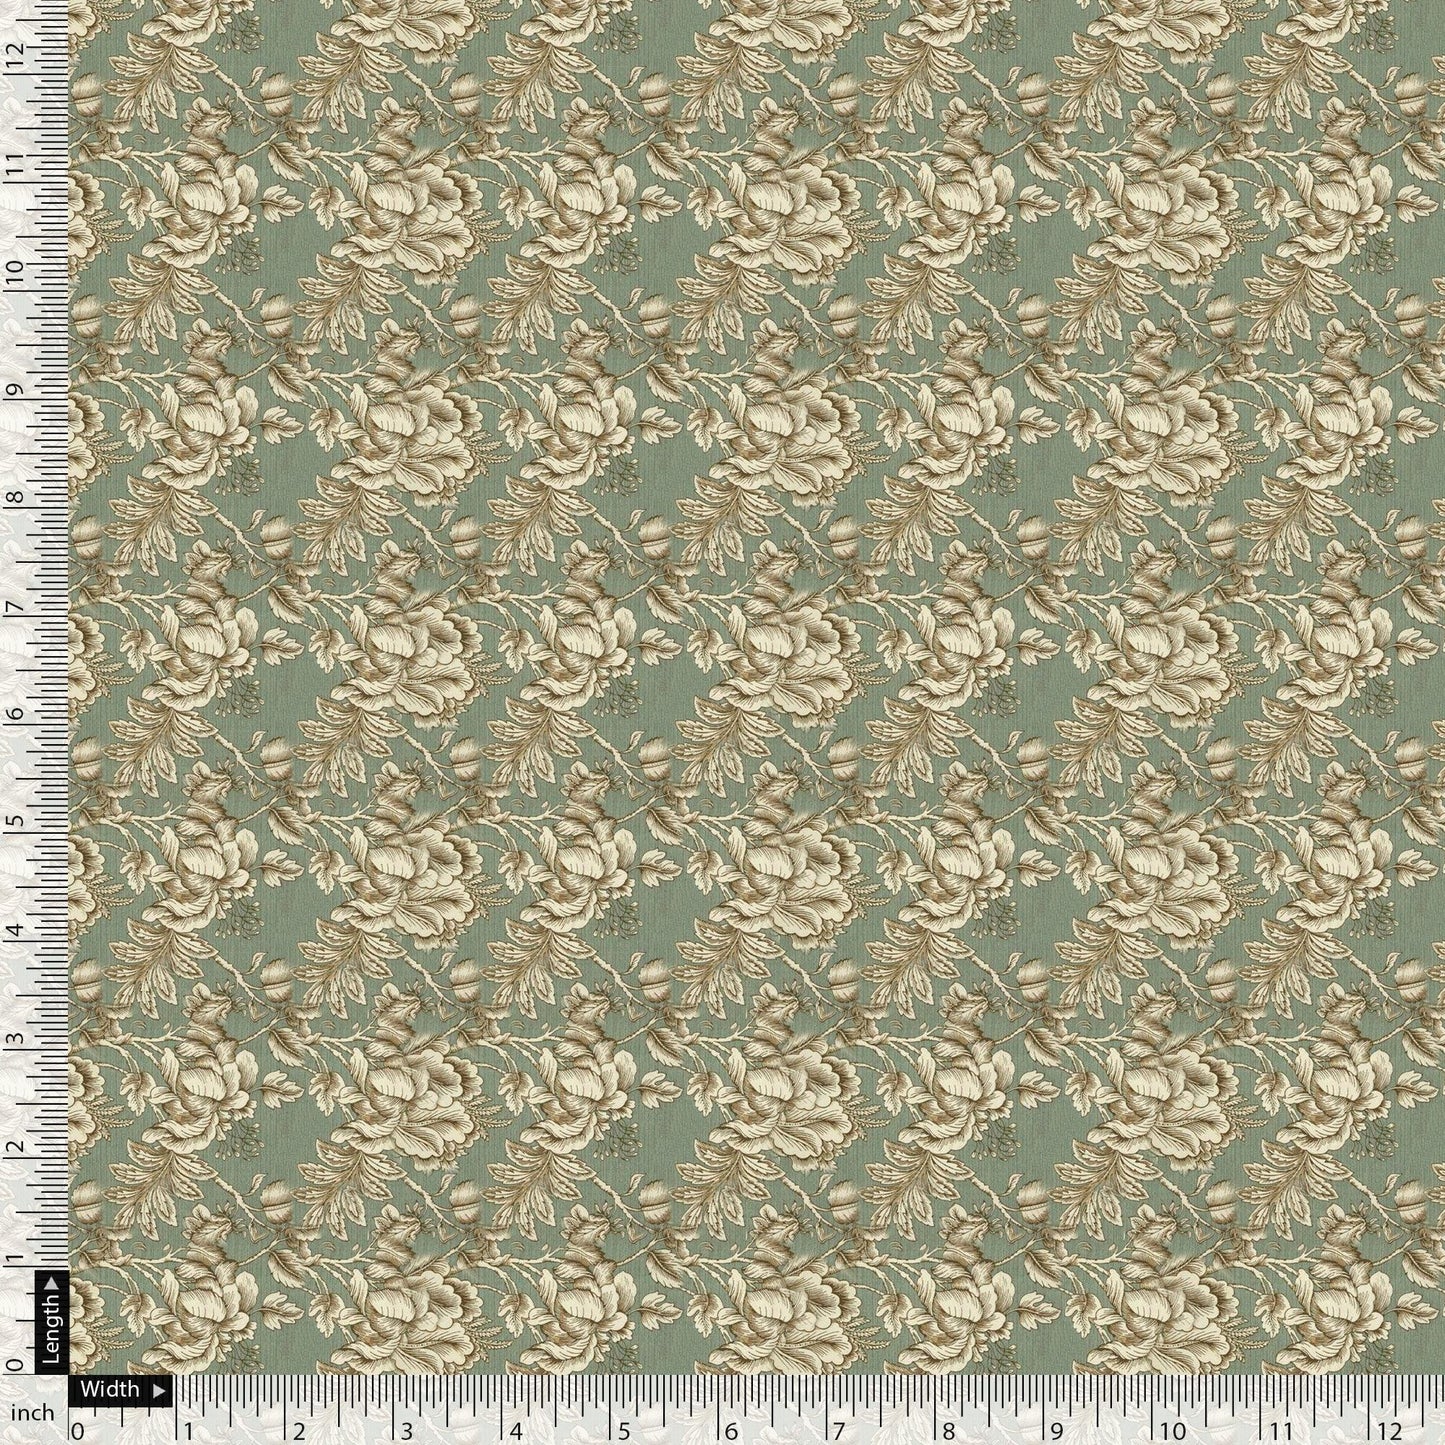 Golden Damask Leaves and Flower Digital Printed Fabric - Pure Cotton - FAB VOGUE Studio®